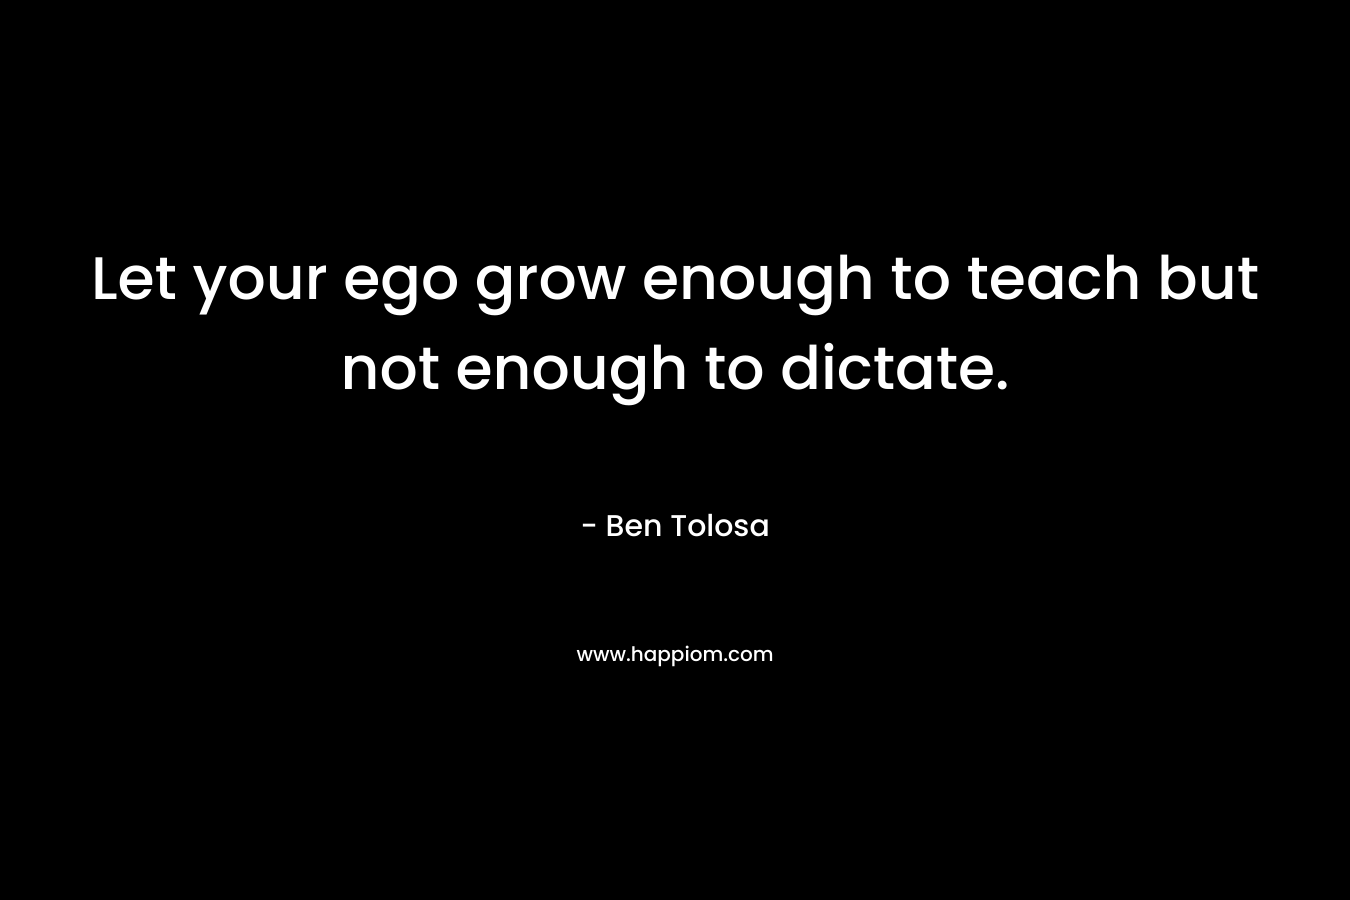 Let your ego grow enough to teach but not enough to dictate. – Ben Tolosa